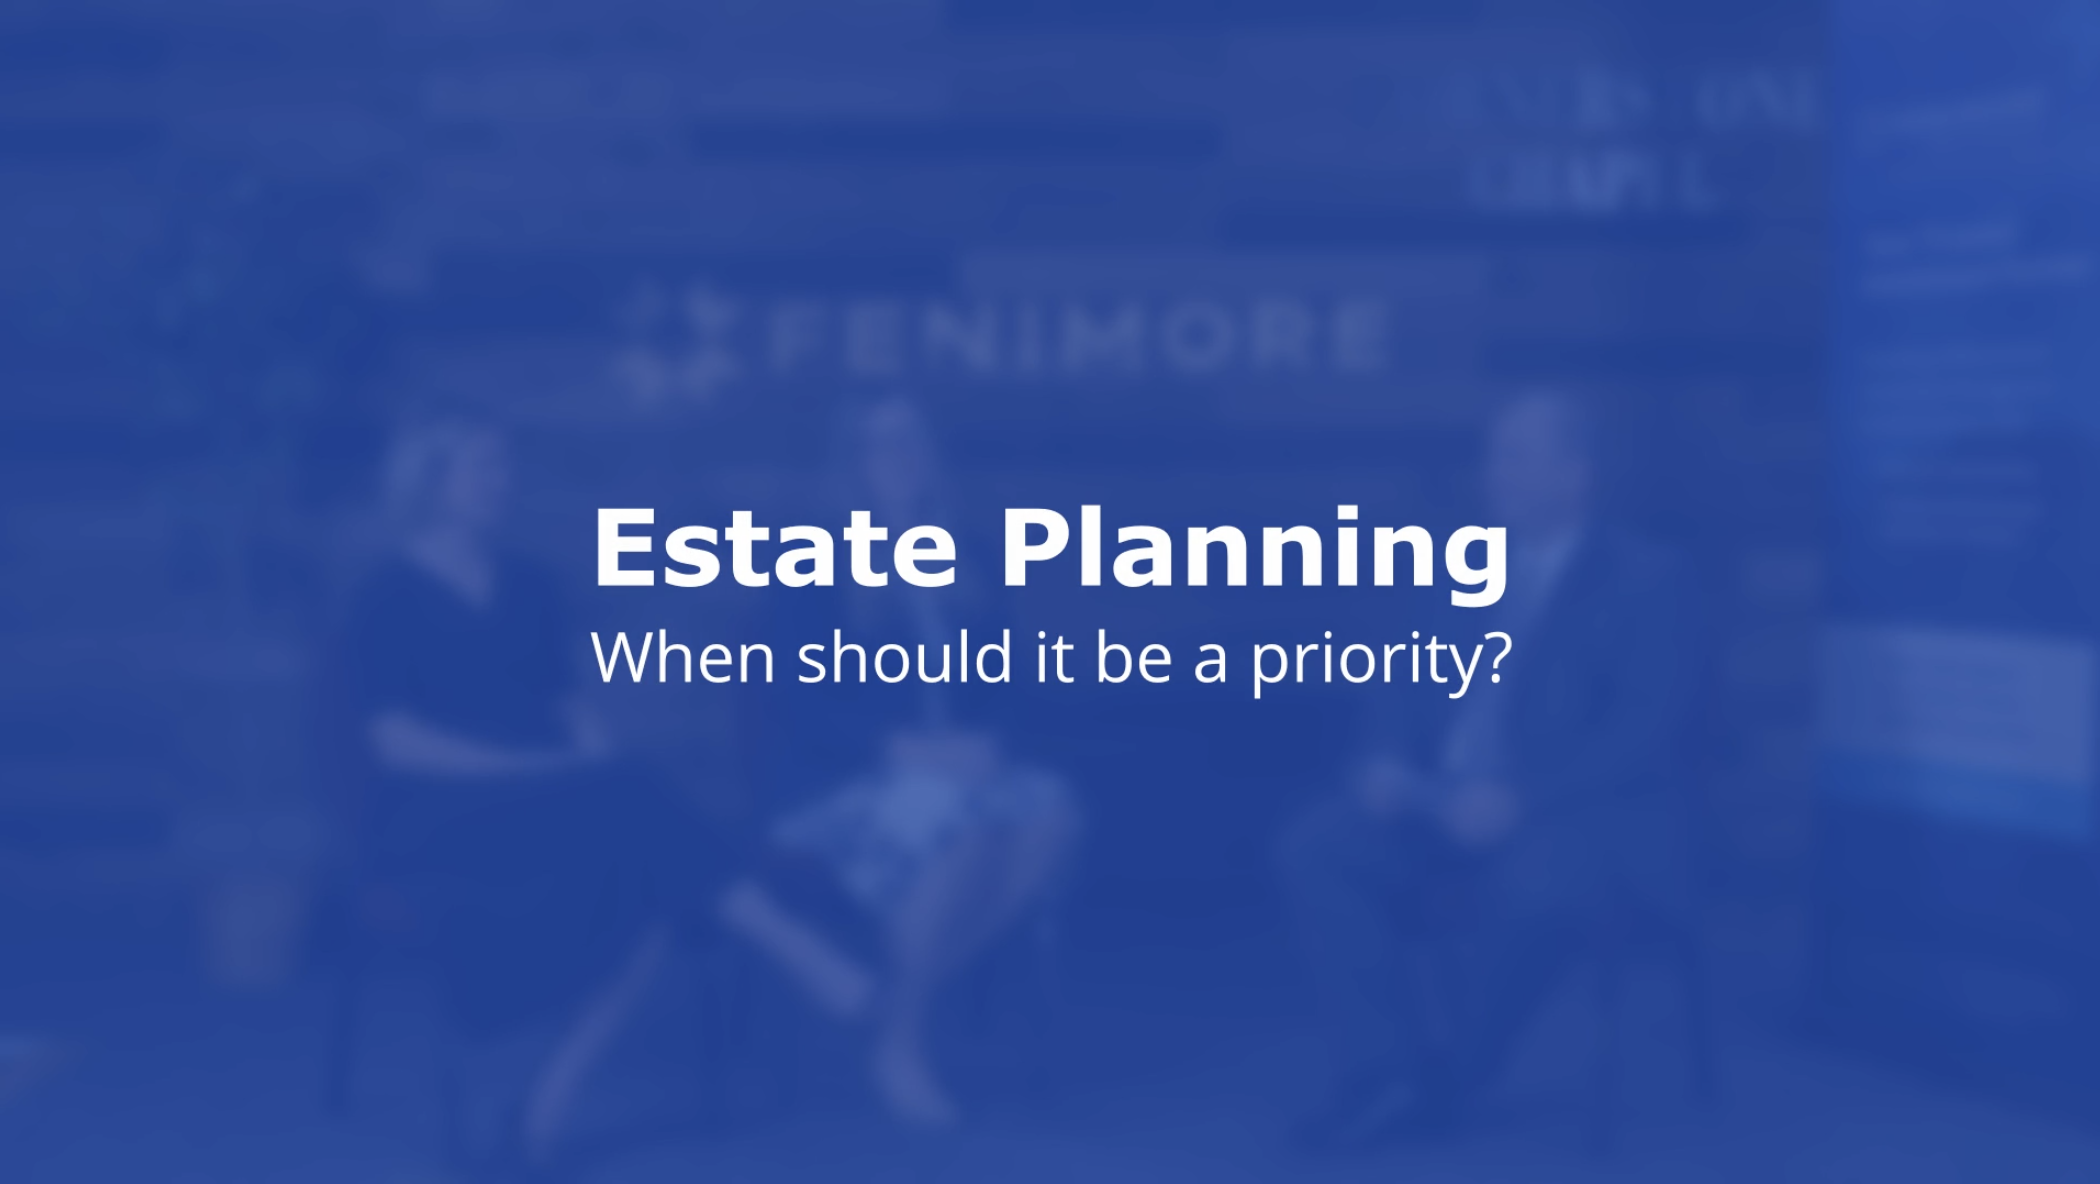 ESTATE PLANNING: When should it be a priority? 